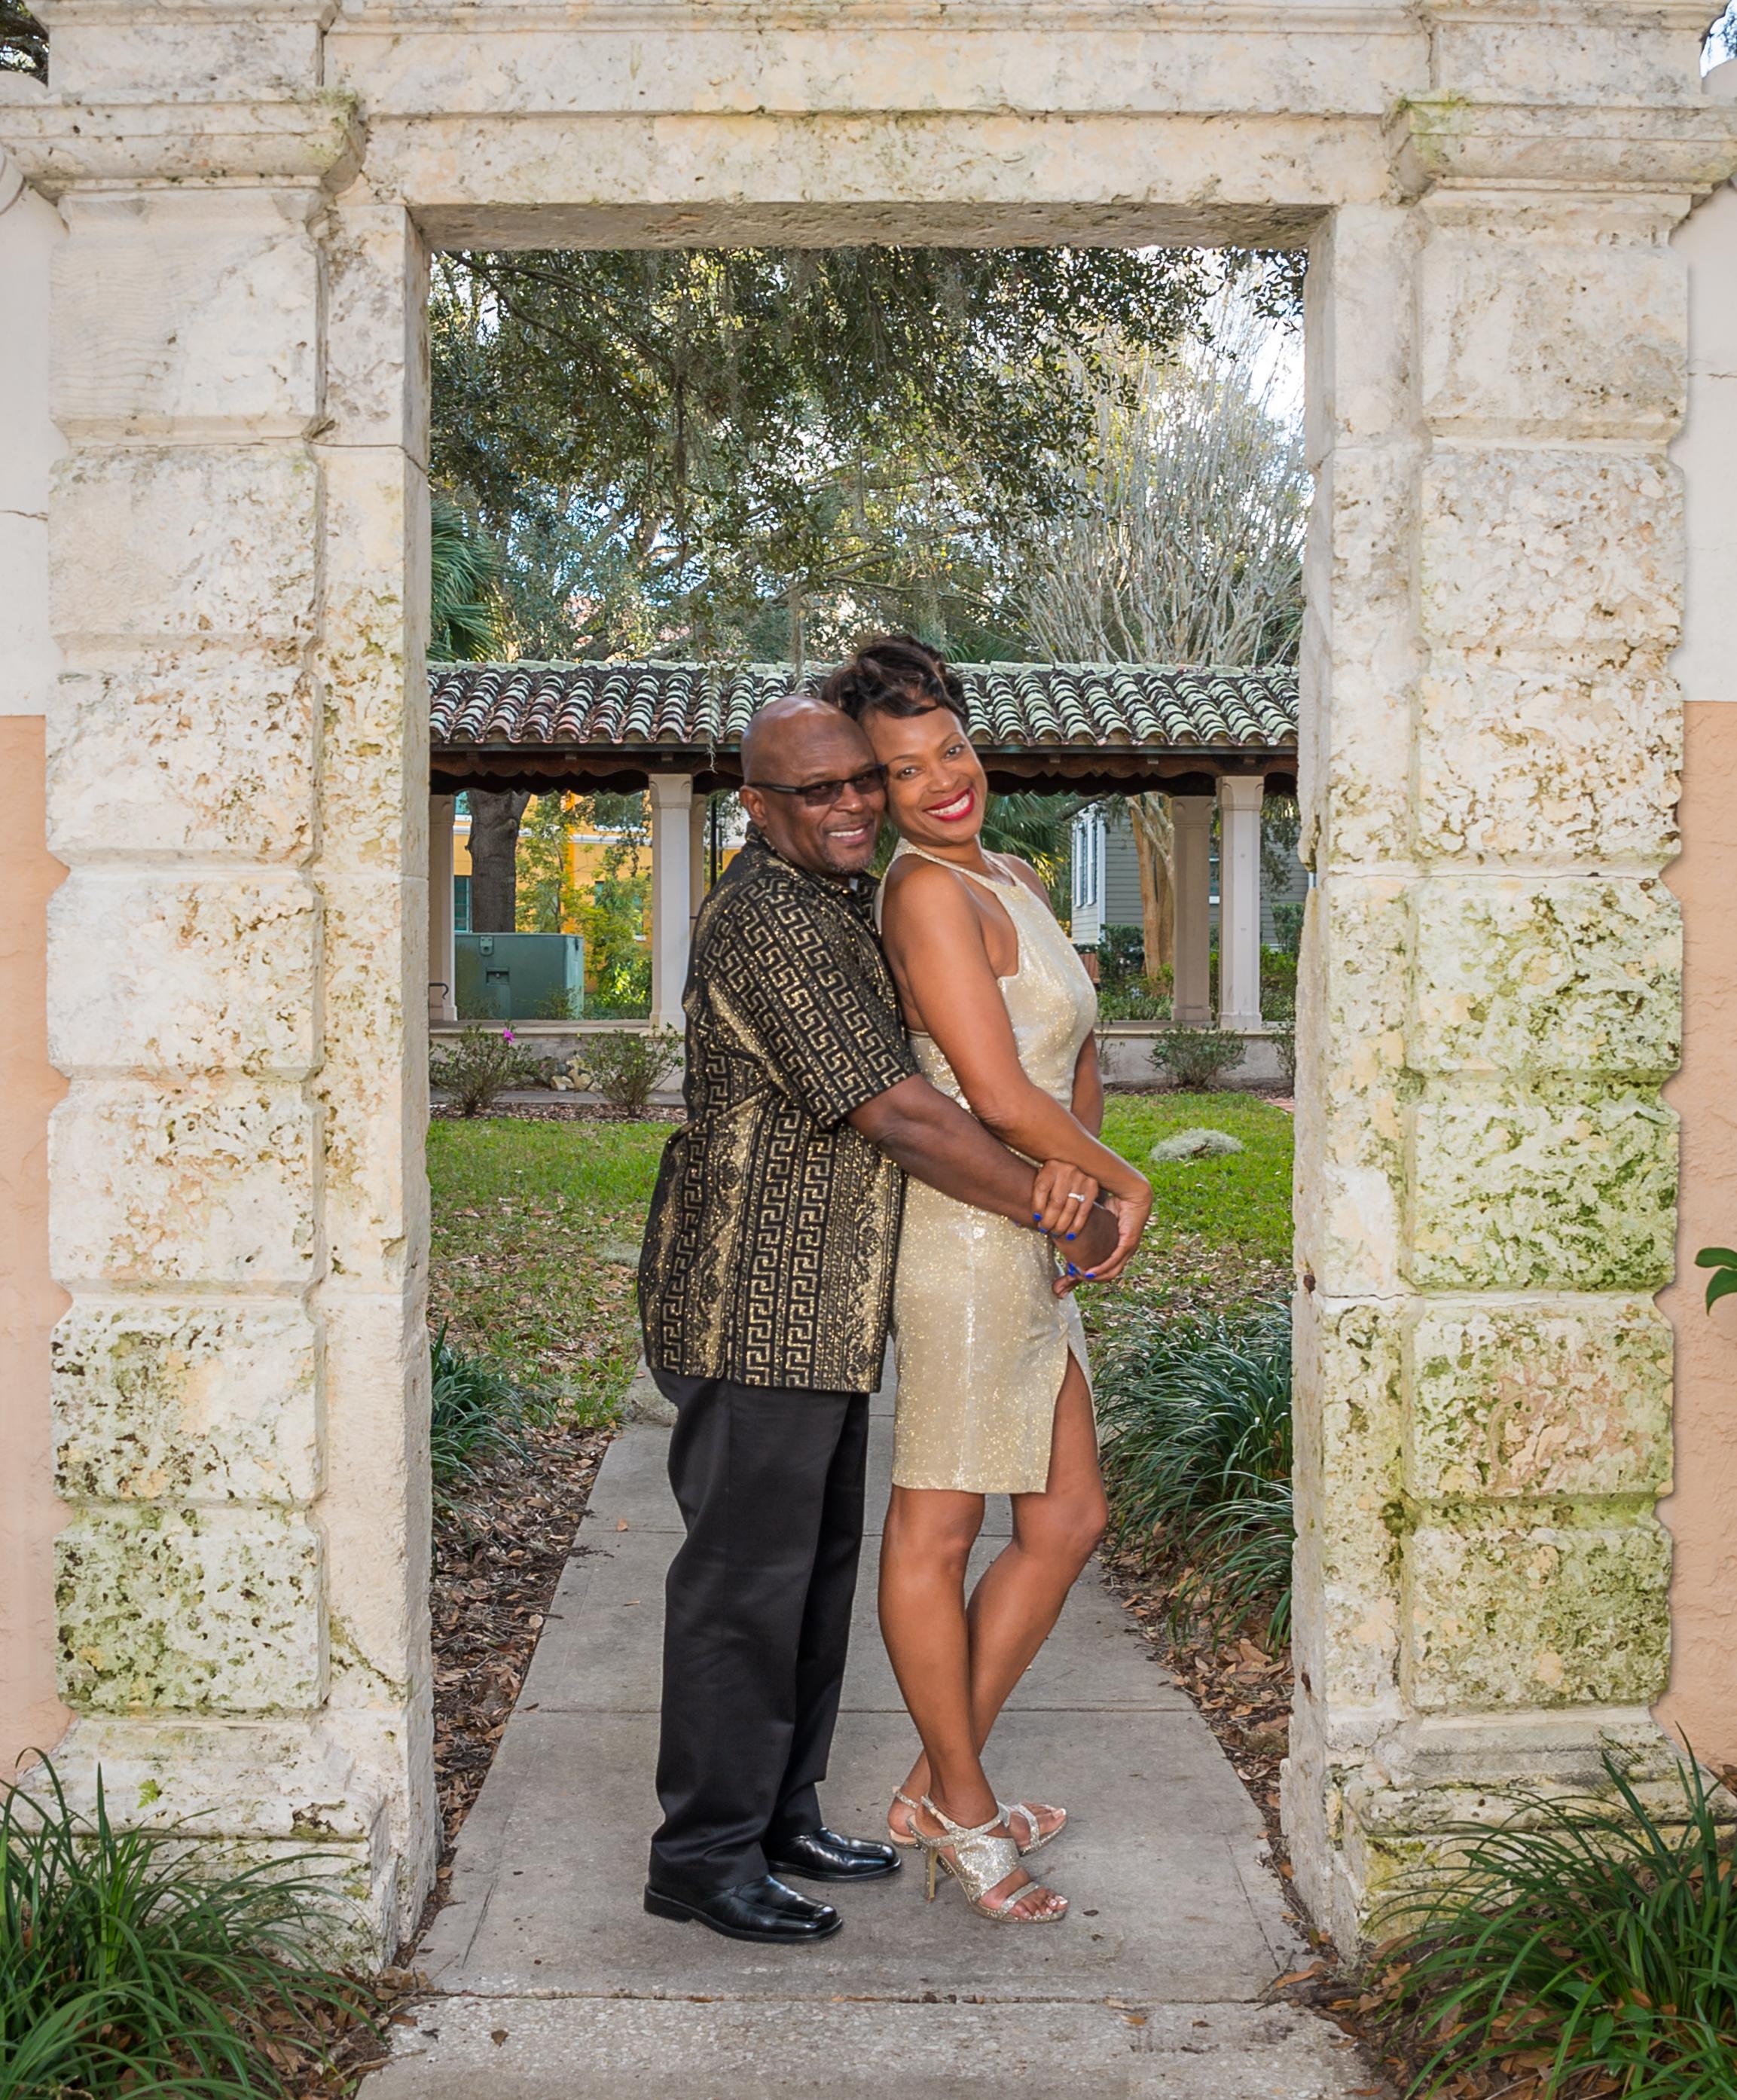 The Wedding Website of ROBERTA TURNER and JACQUES SWEATT